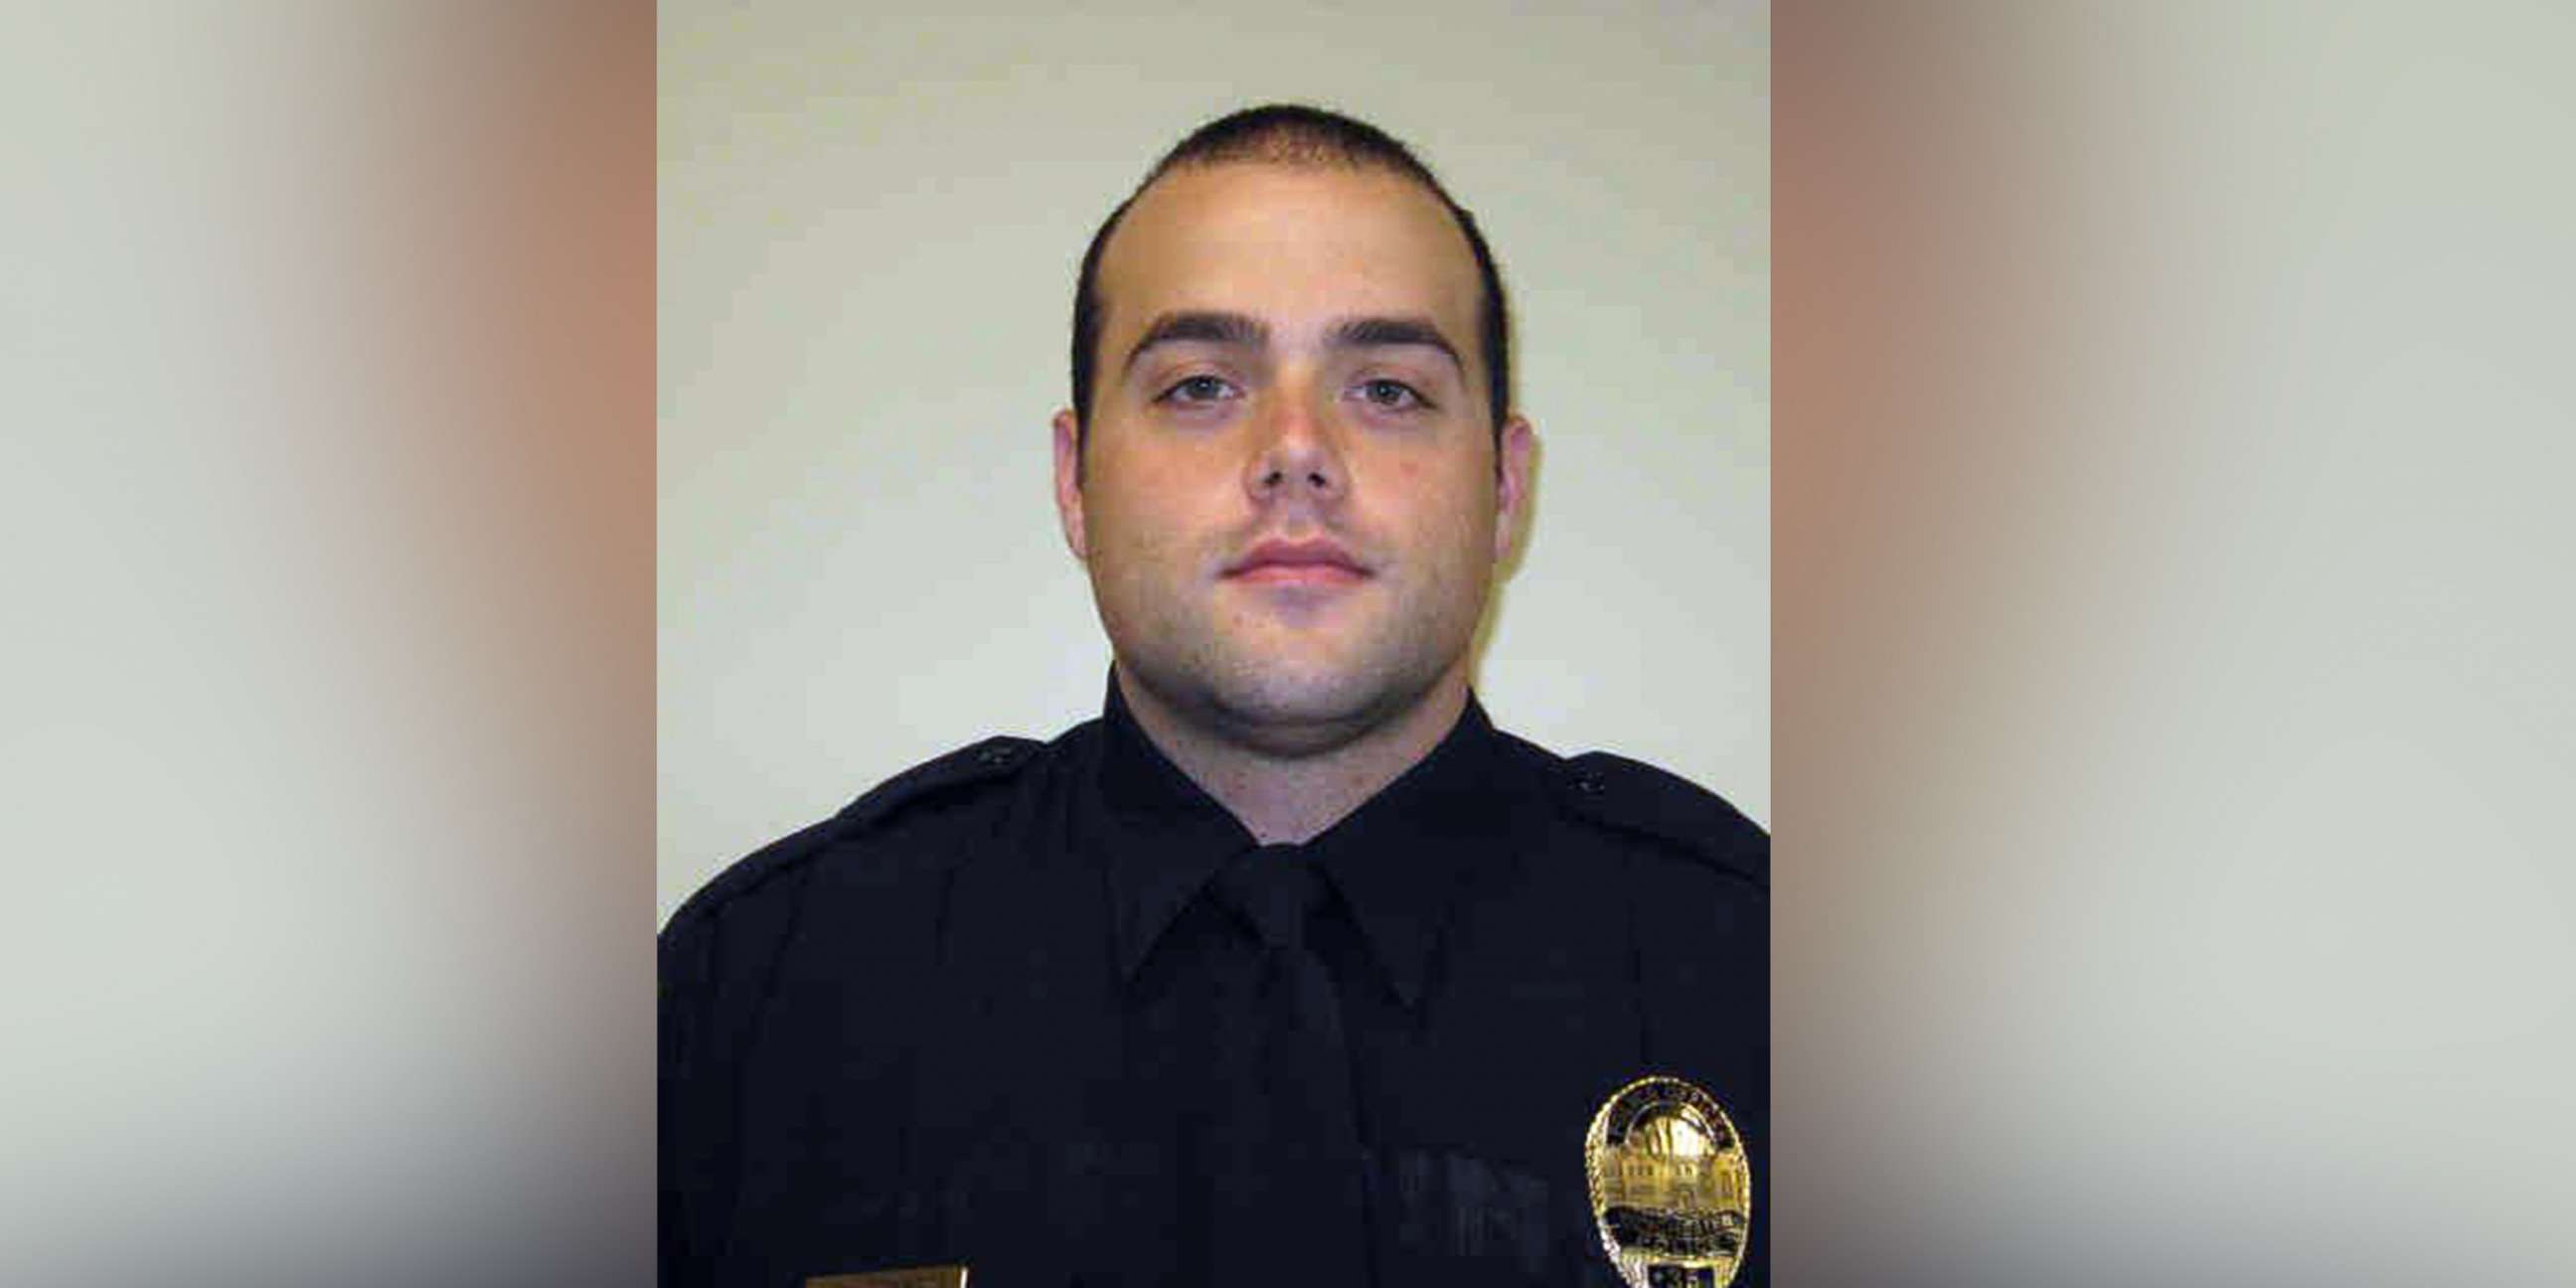 PHOTO: Officer Hunter Edwards, 30, of the Winchester, Va., Police Department was killed in a car crash on the evening of Nov. 24, 2018.